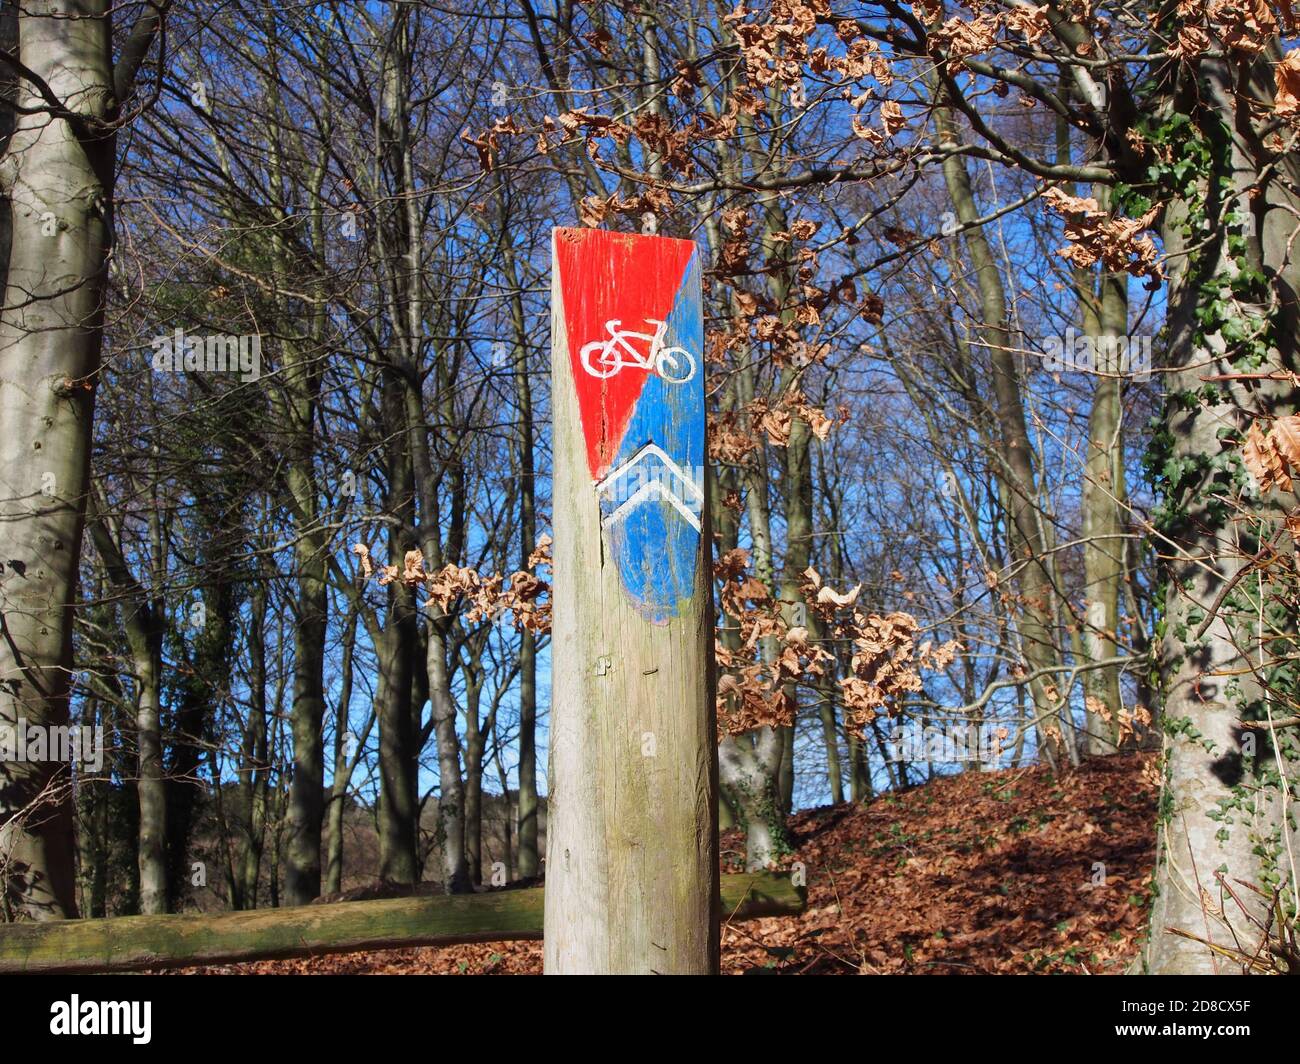 A sign post showing the route of a mountain bike cycle route Stock Photo